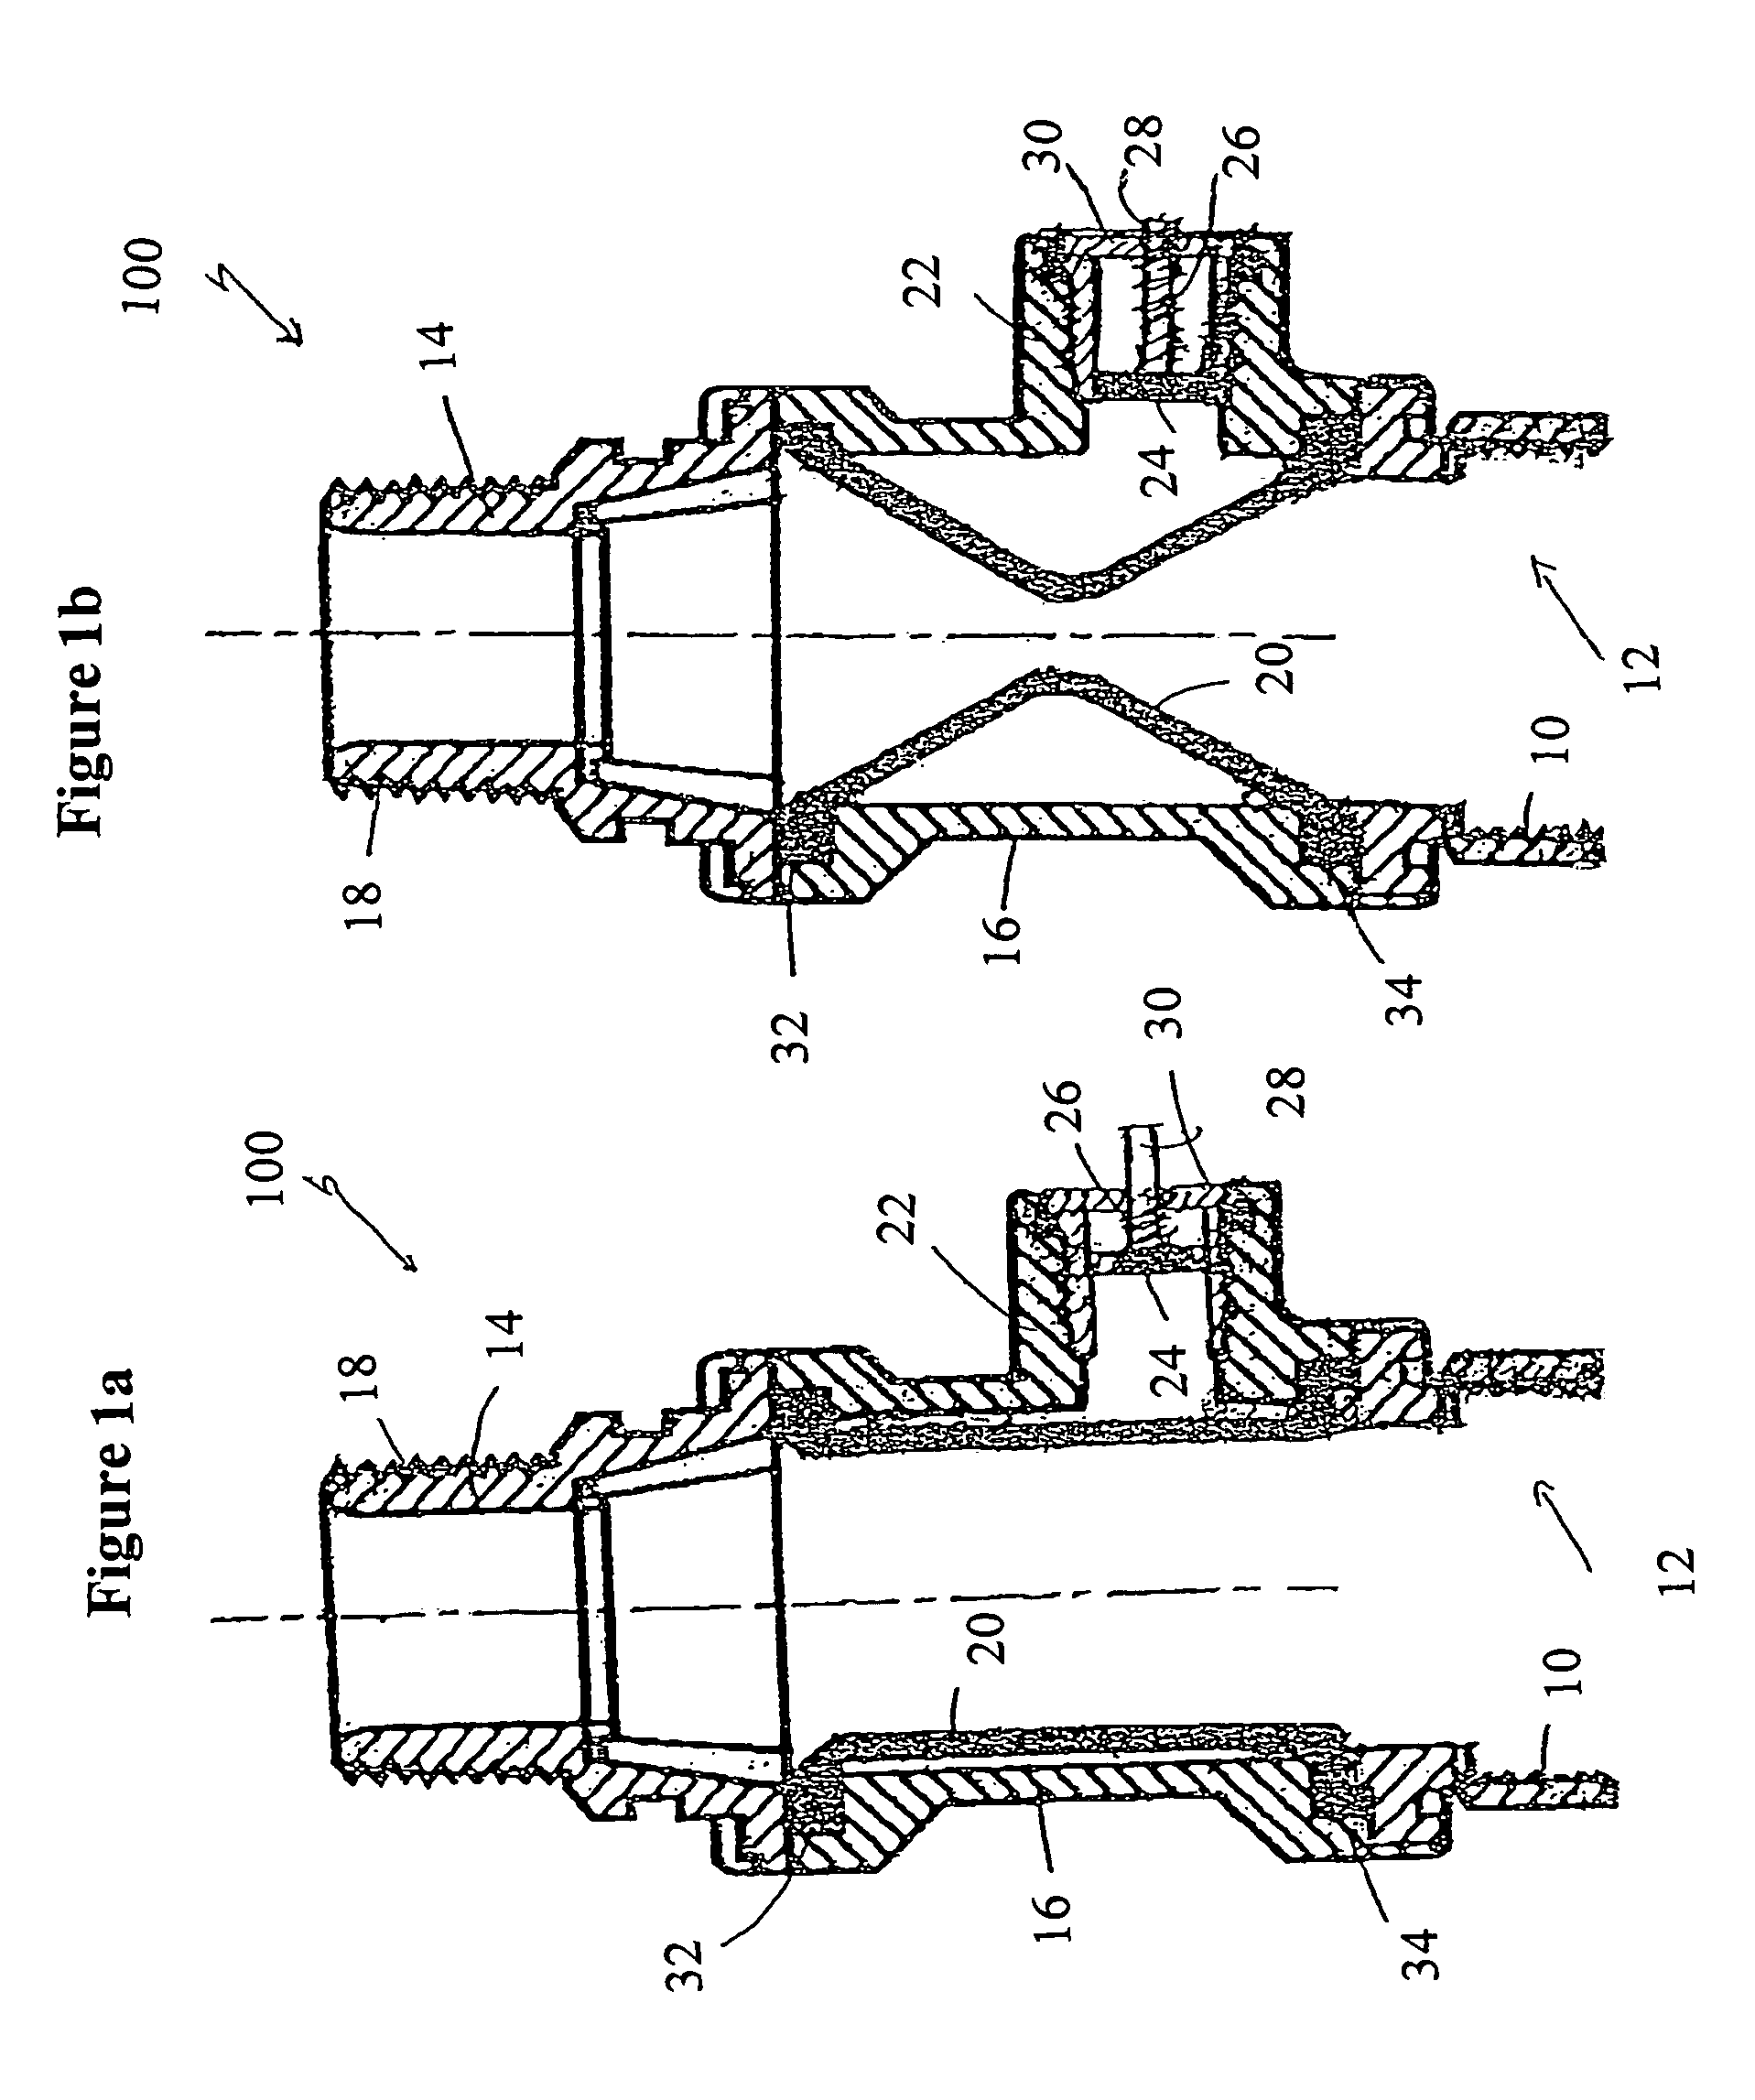 Automatic fire sprinkler having a variable orifice